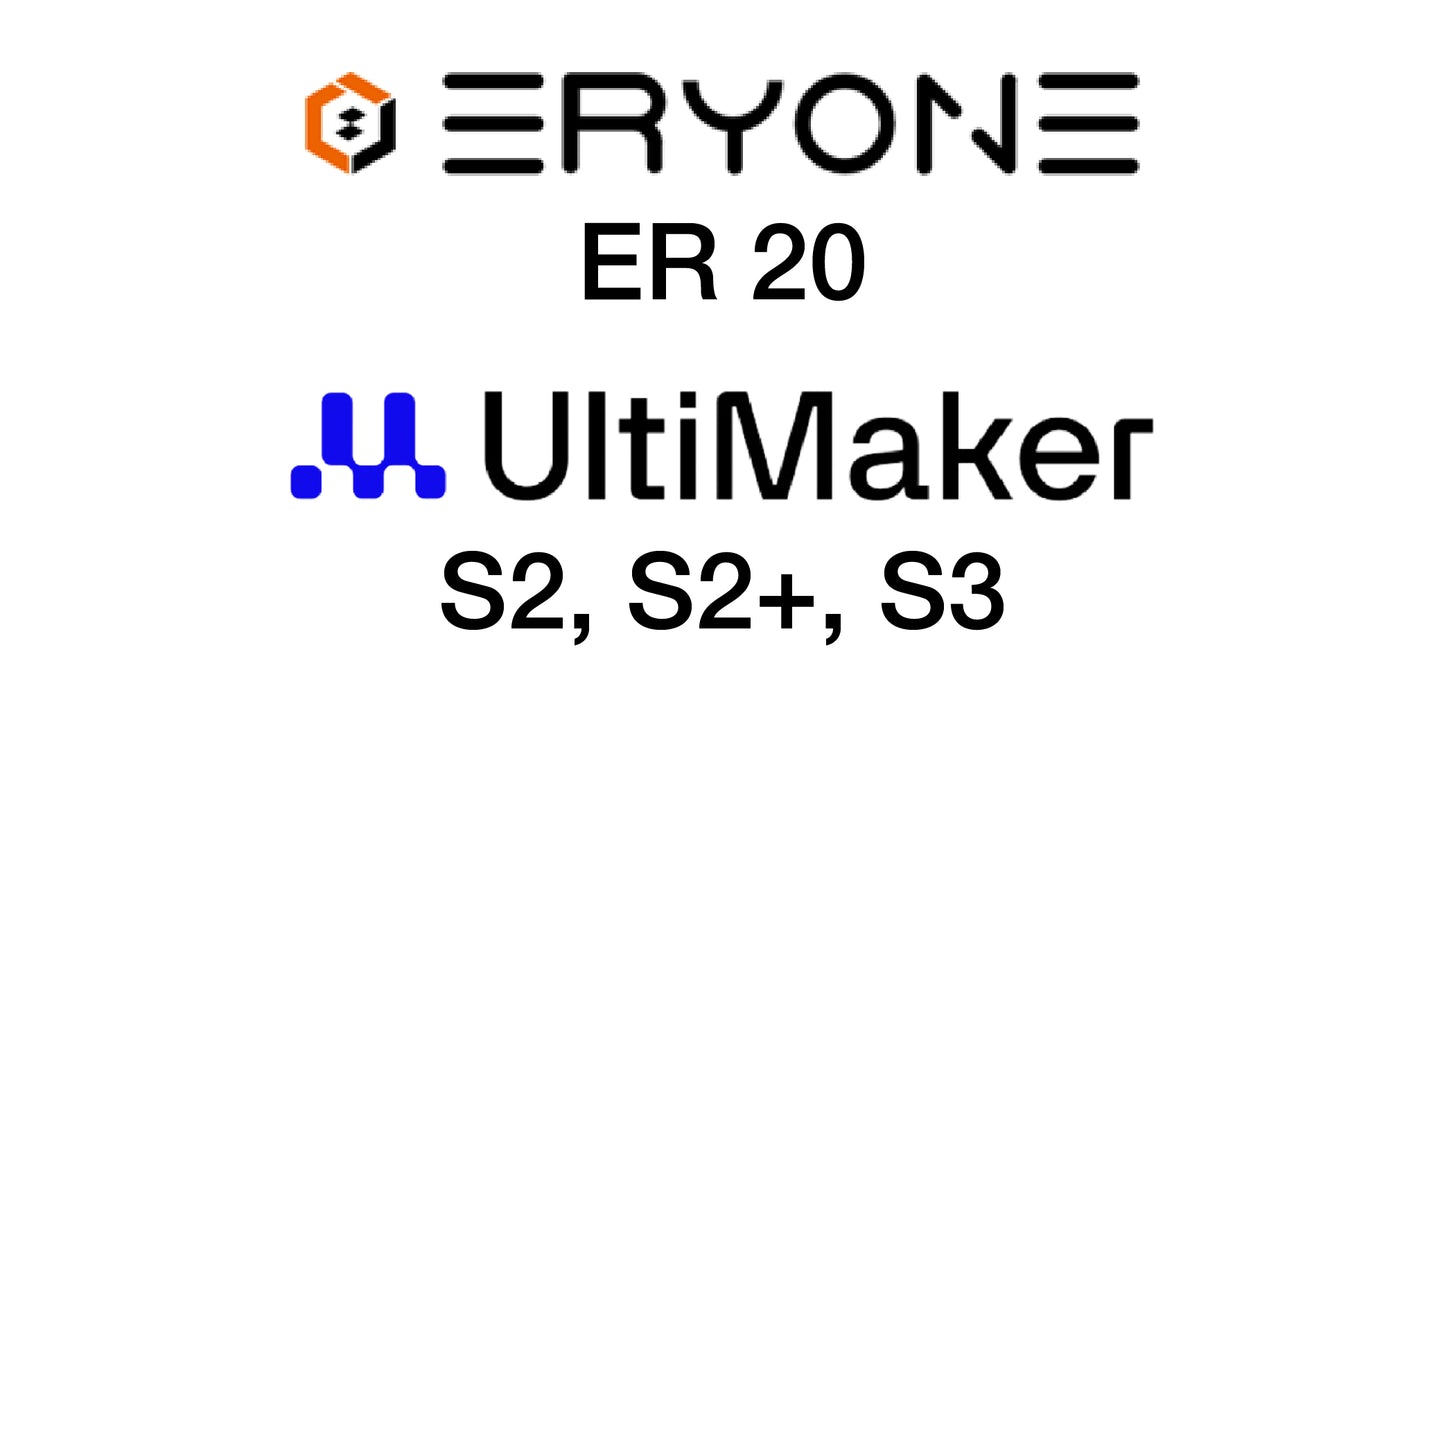 Kit with PEX - Eryone ER 20, UltiMaker S2 and S3 - 258 x 230